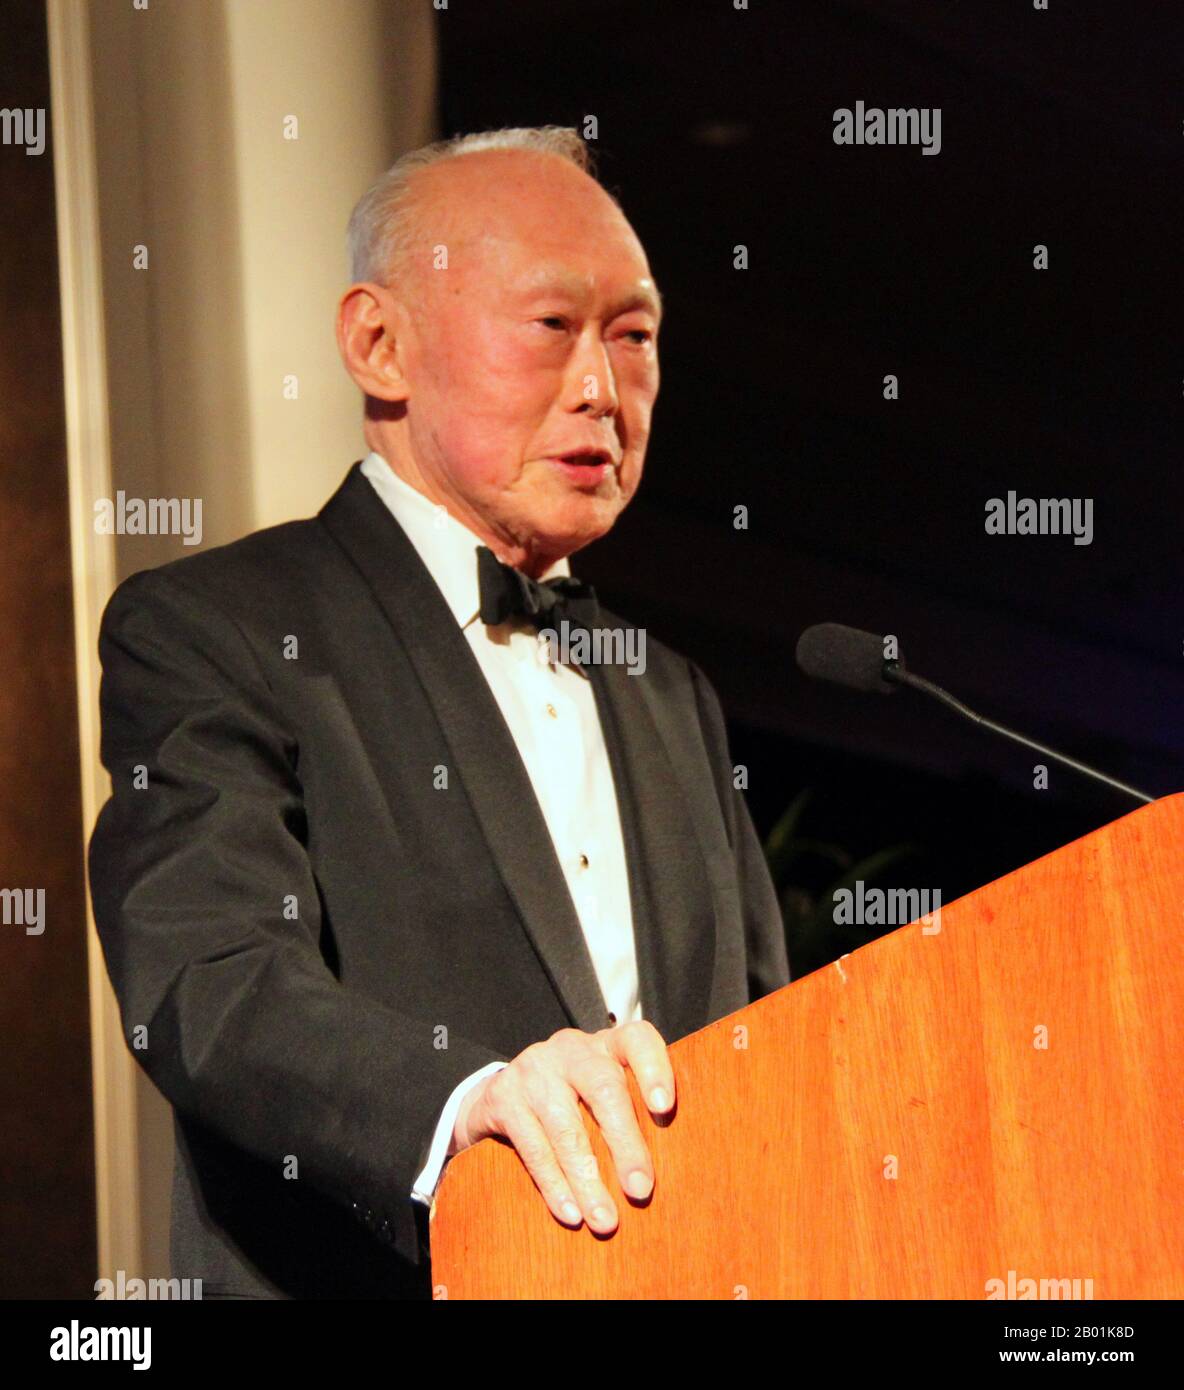 Singapore: Lee Kuan Yew (16 September 1923 - 23 March 2015), first Prime Minister of the Republic of Singapore (r. 1959-1990), giving a speech during his time as Minister Mentor (r. 2004-2011), 2009. Photo by the Singapore Government (CC BY-SA 3.0 License).  Lee Kuan Yew/Lee Kwan-Yew, GCMG, CH, is a Singaporean statesman. He was the first Prime Minister of the Republic of Singapore and was one of the longest serving Prime Ministers in the world. He oversaw the separation of Singapore from Malaysia in 1965 and its transformation from a underdeveloped colonial outpost into a major economic power Stock Photo